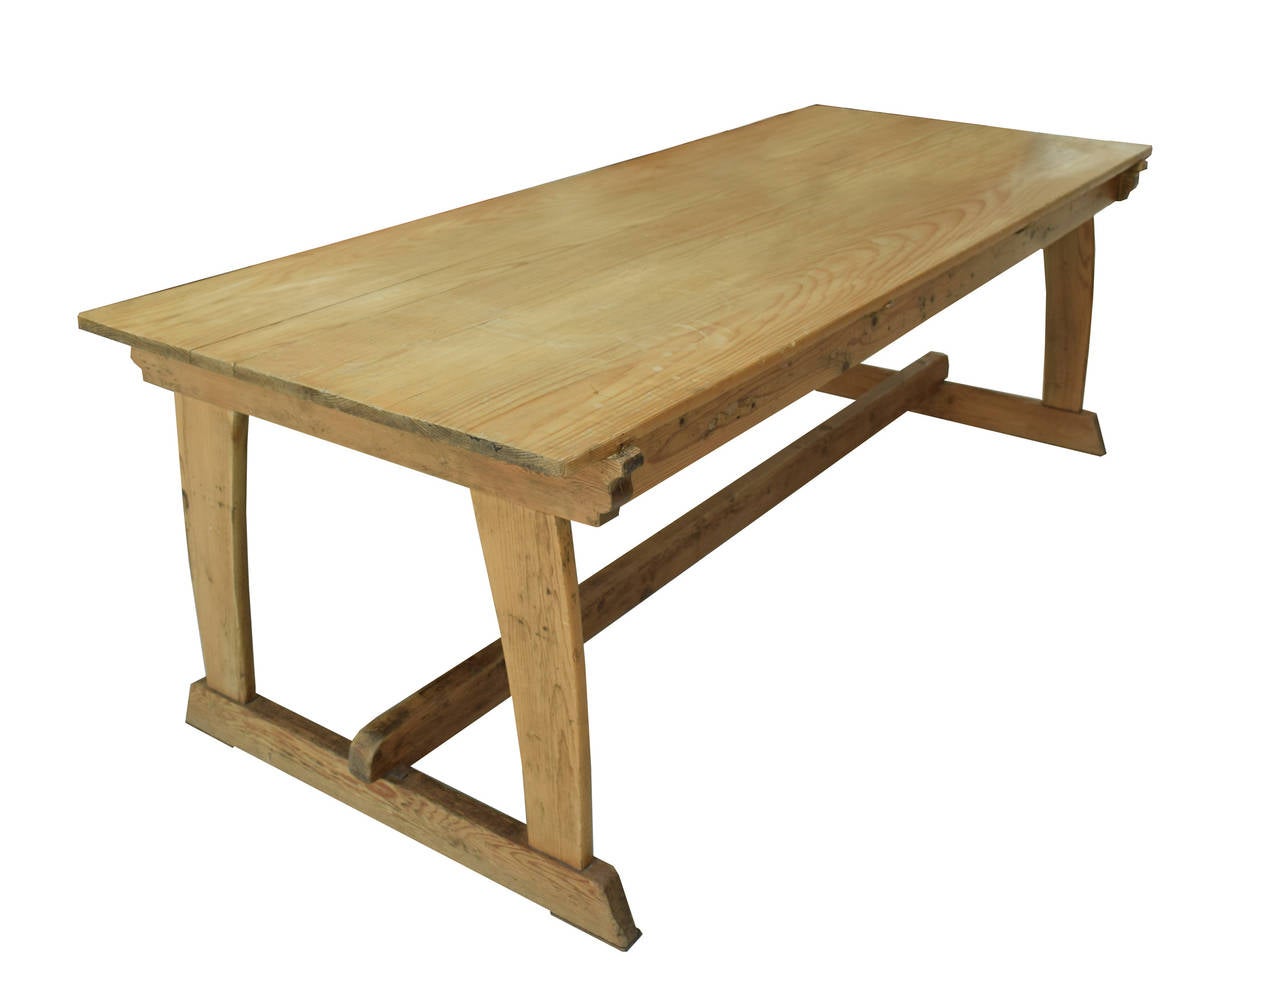 Early 20th Century Pine trestle table from England.